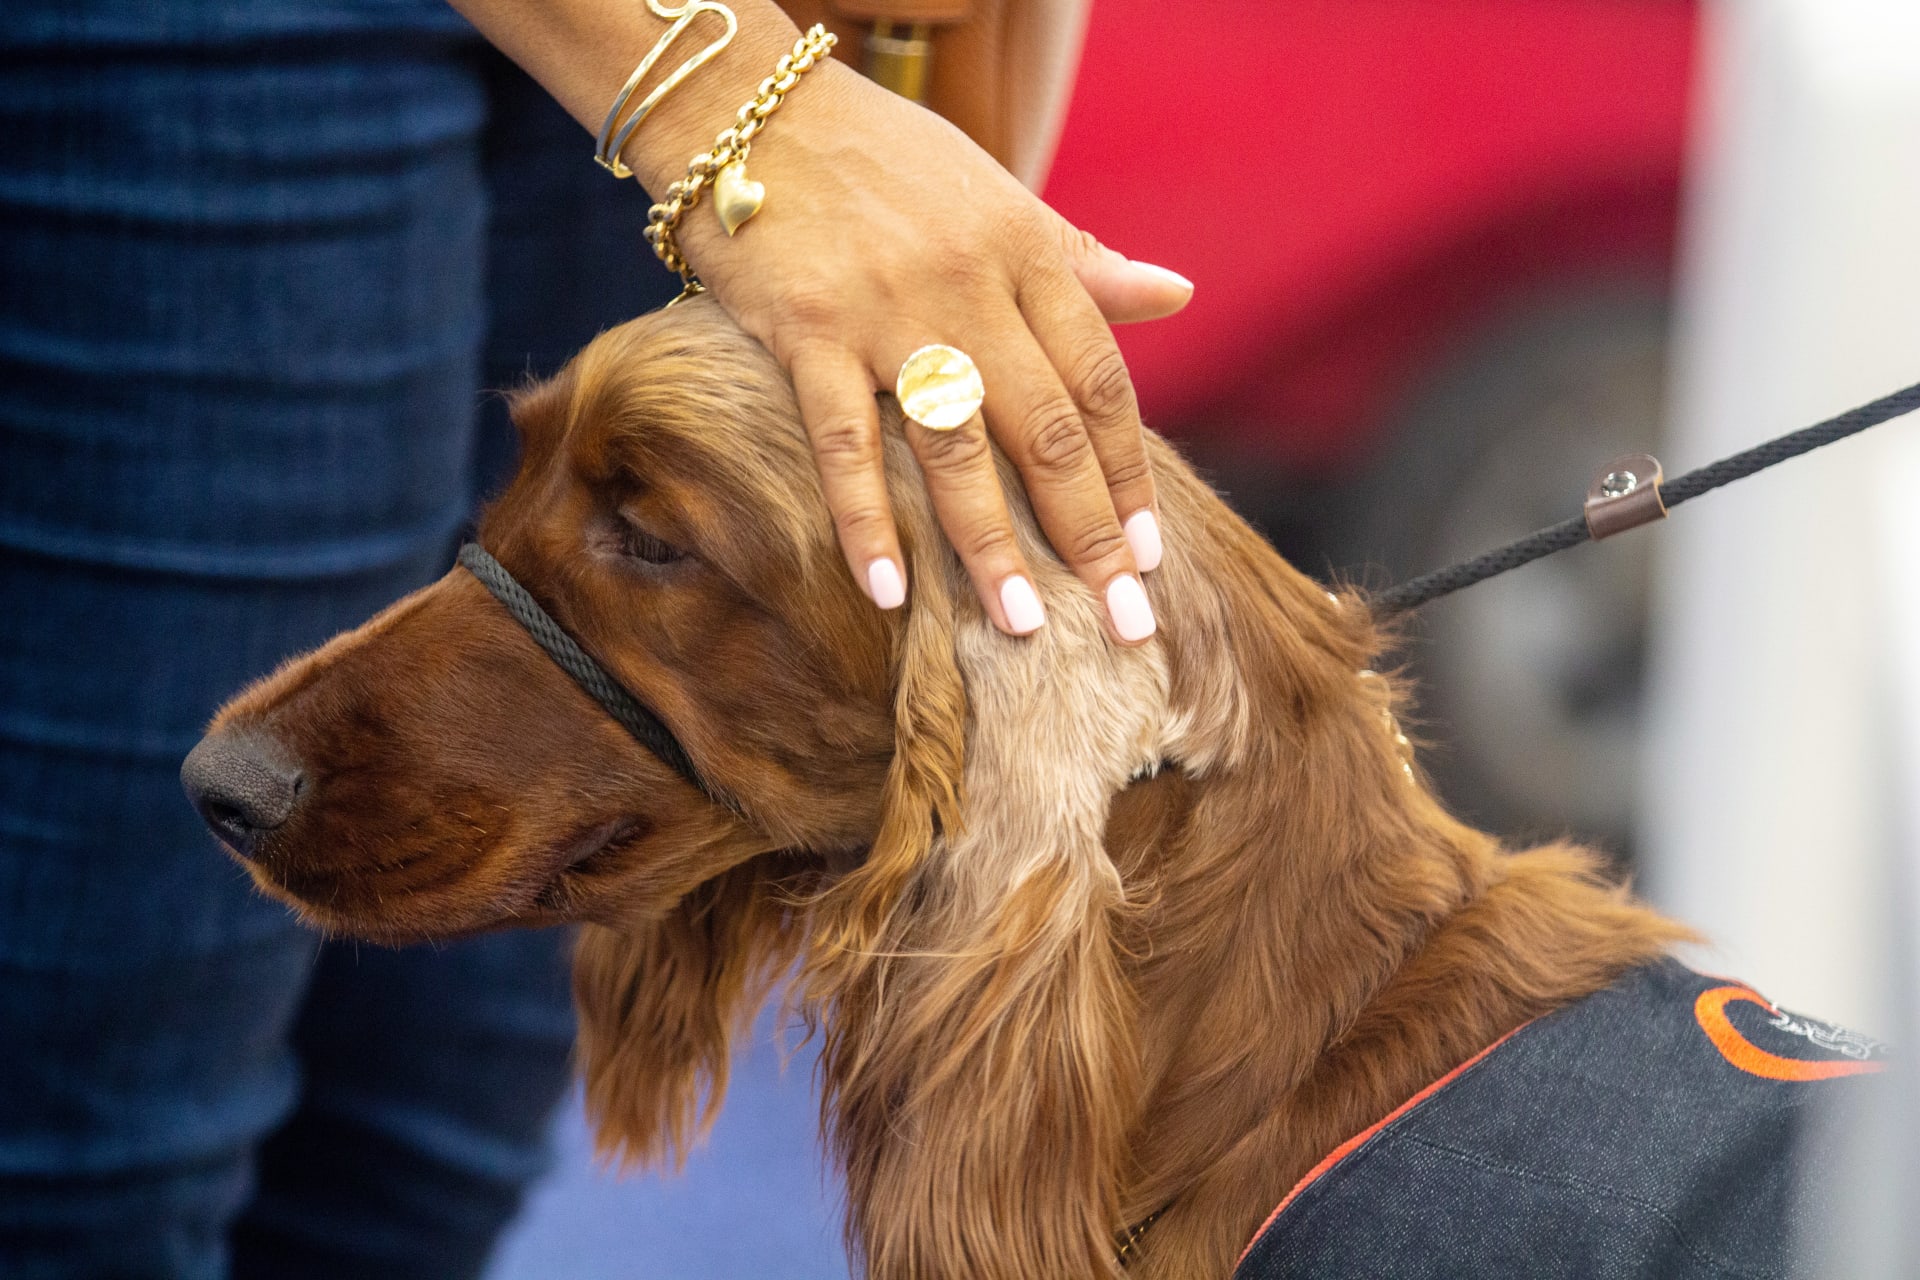 Irish setter O'Malley gets petted at the Cesar booth. (Mauro Whiteman/SHRM)